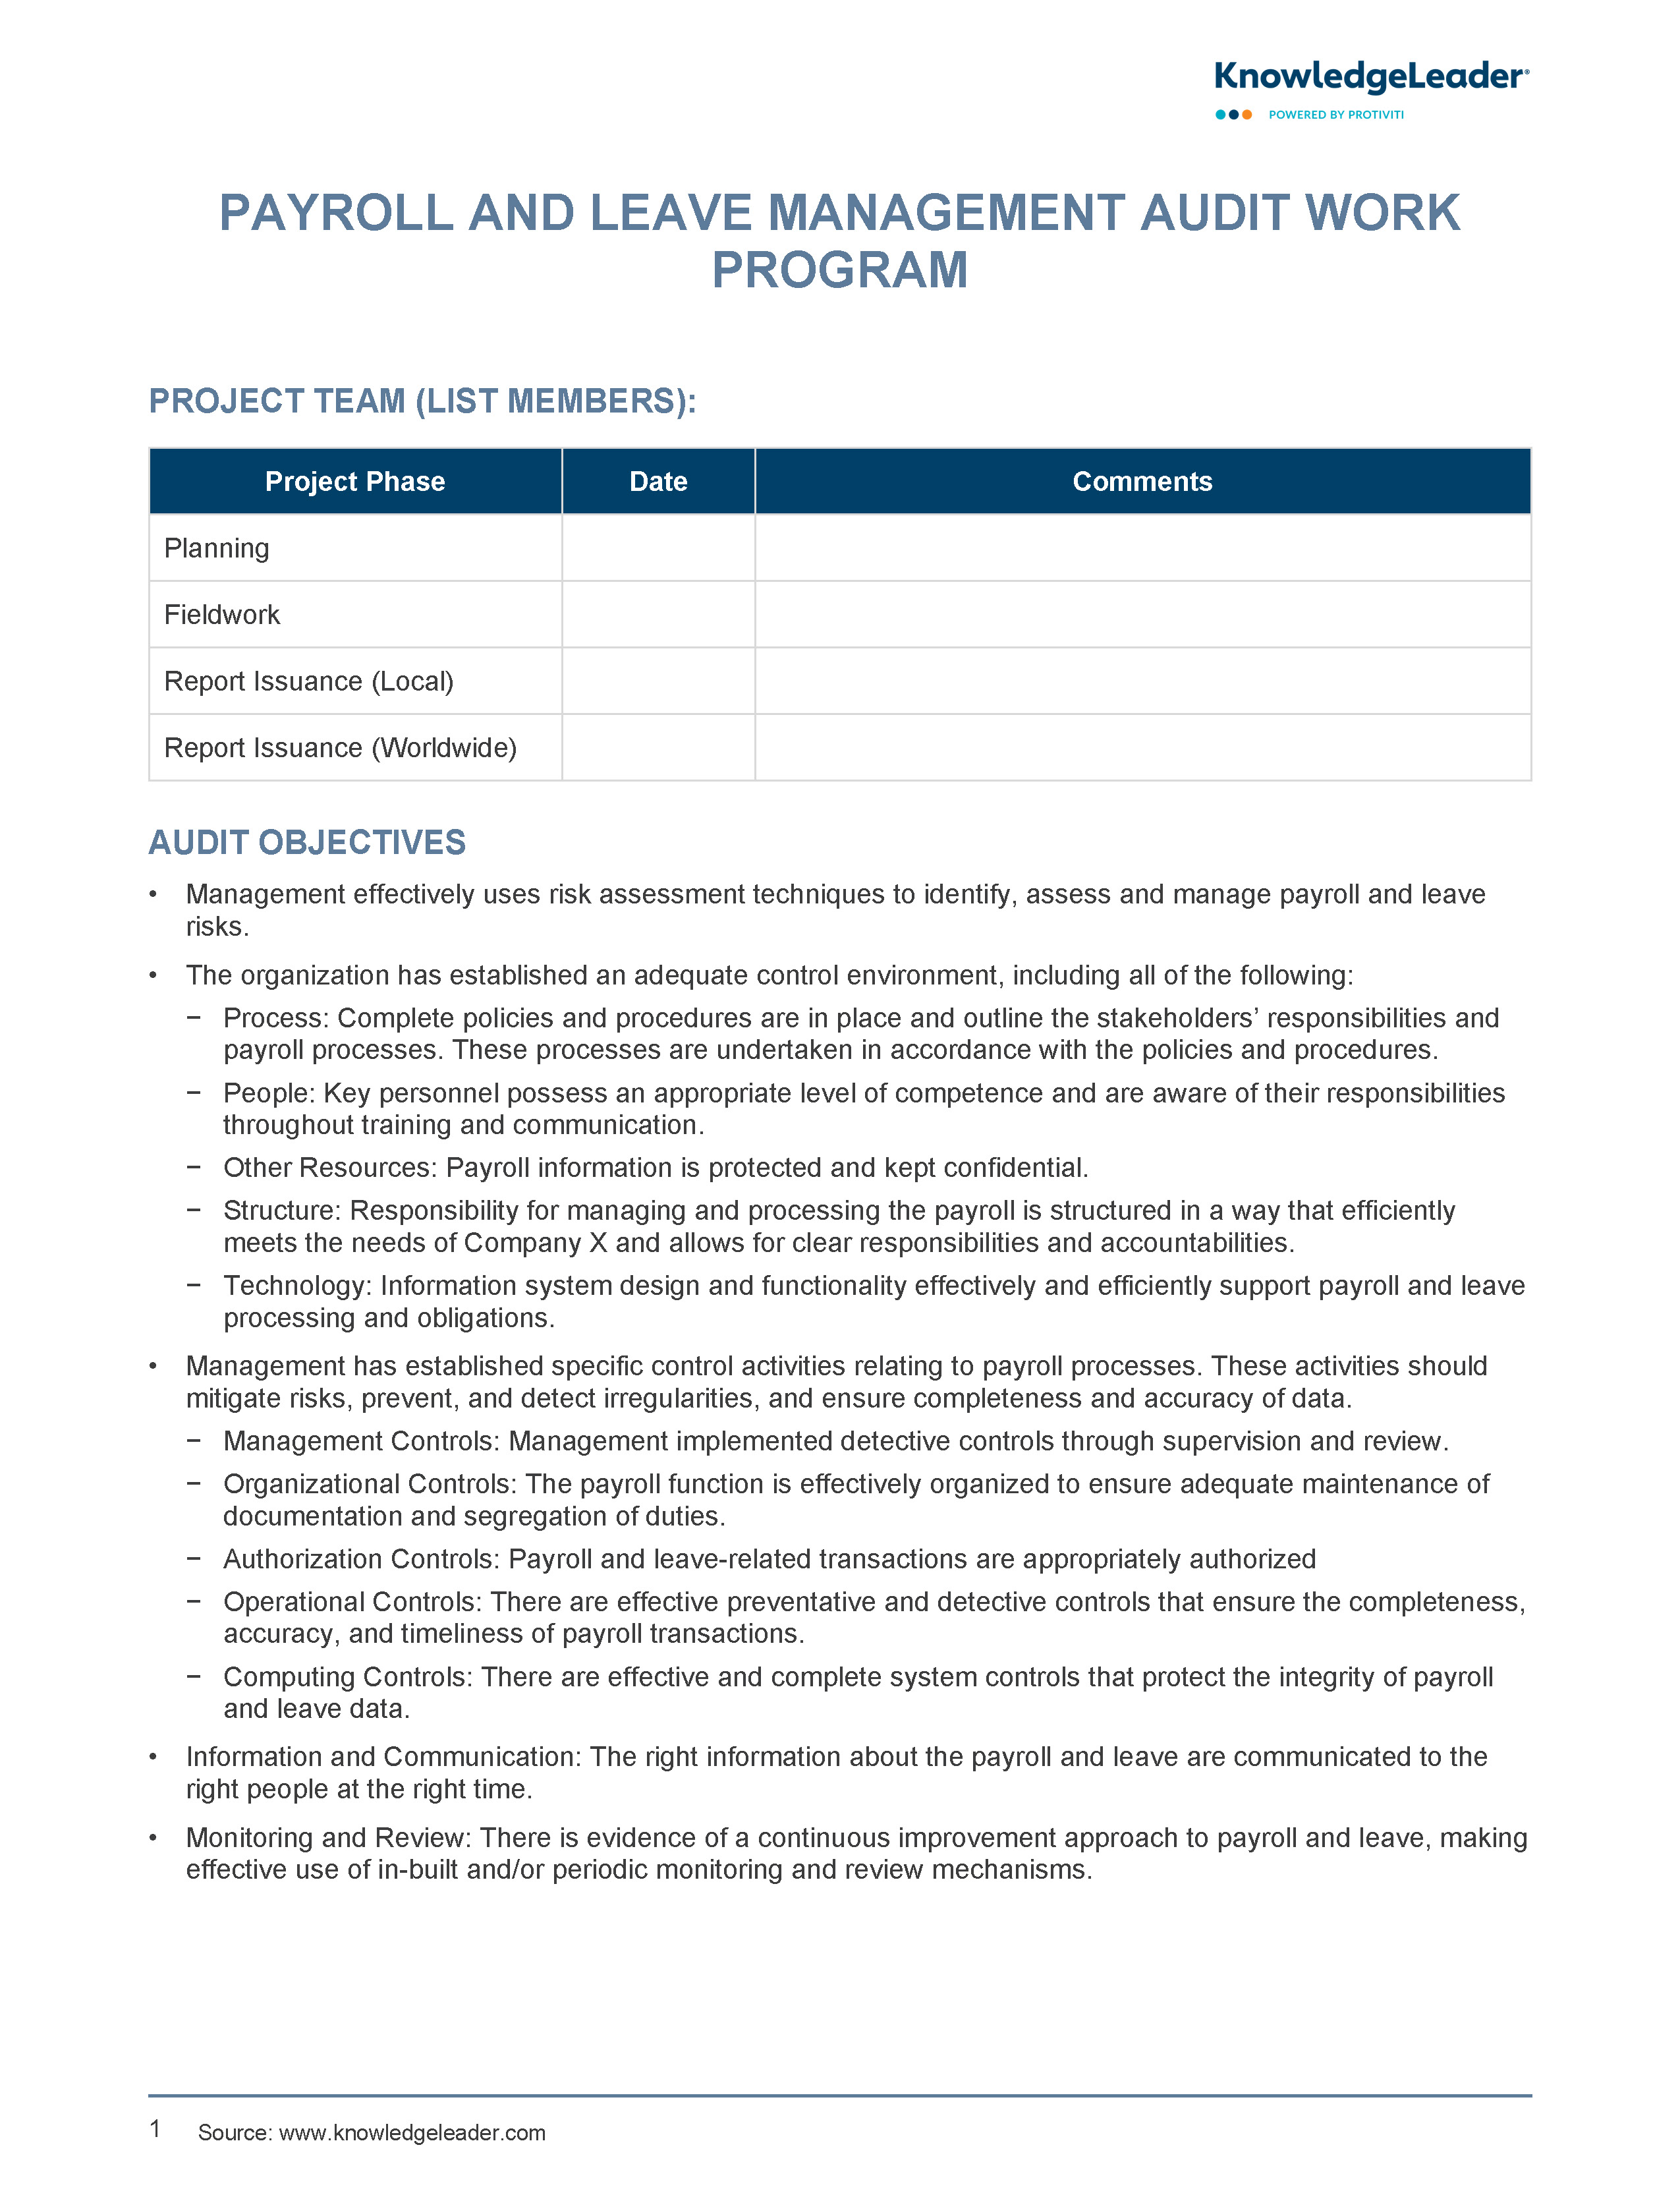 Screenshot of the first page of Payroll and Leave Management Audit Work Program